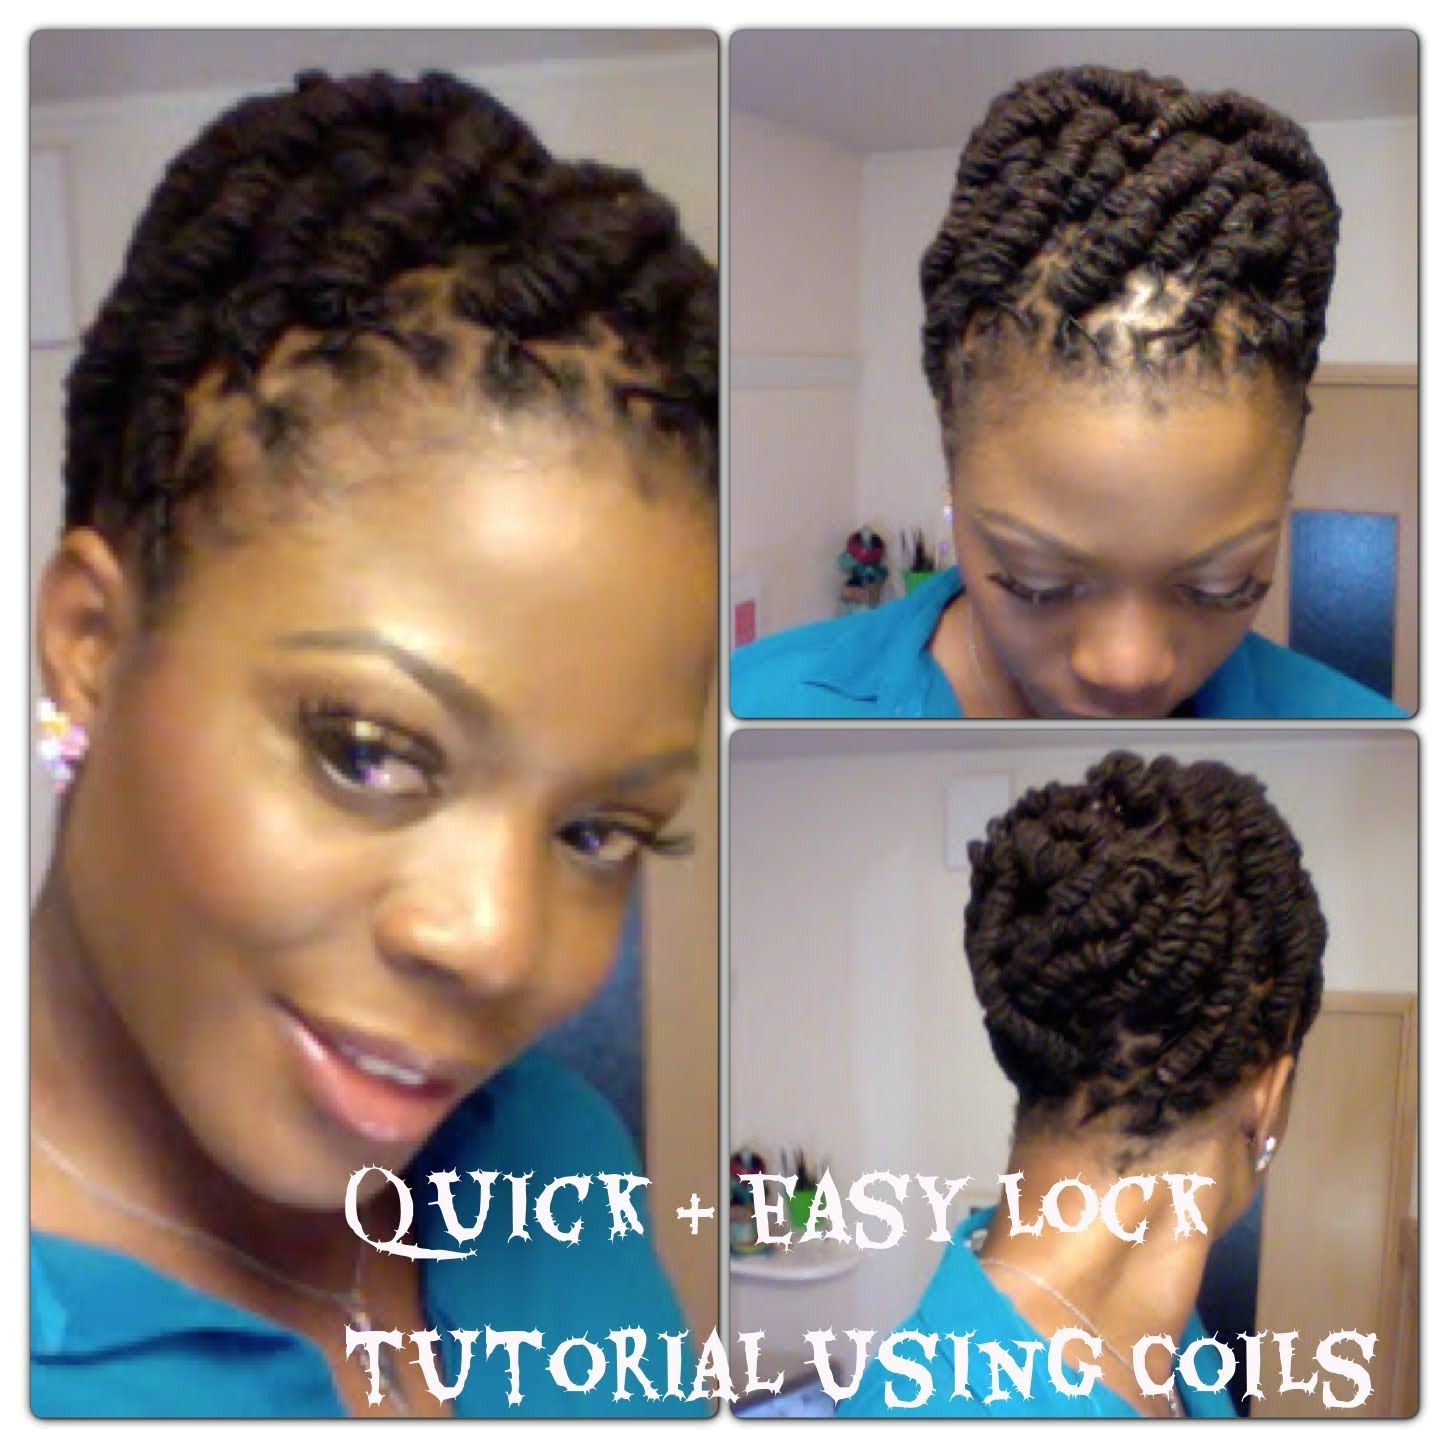 Simple and Quick Lock Hairstyle using Coils